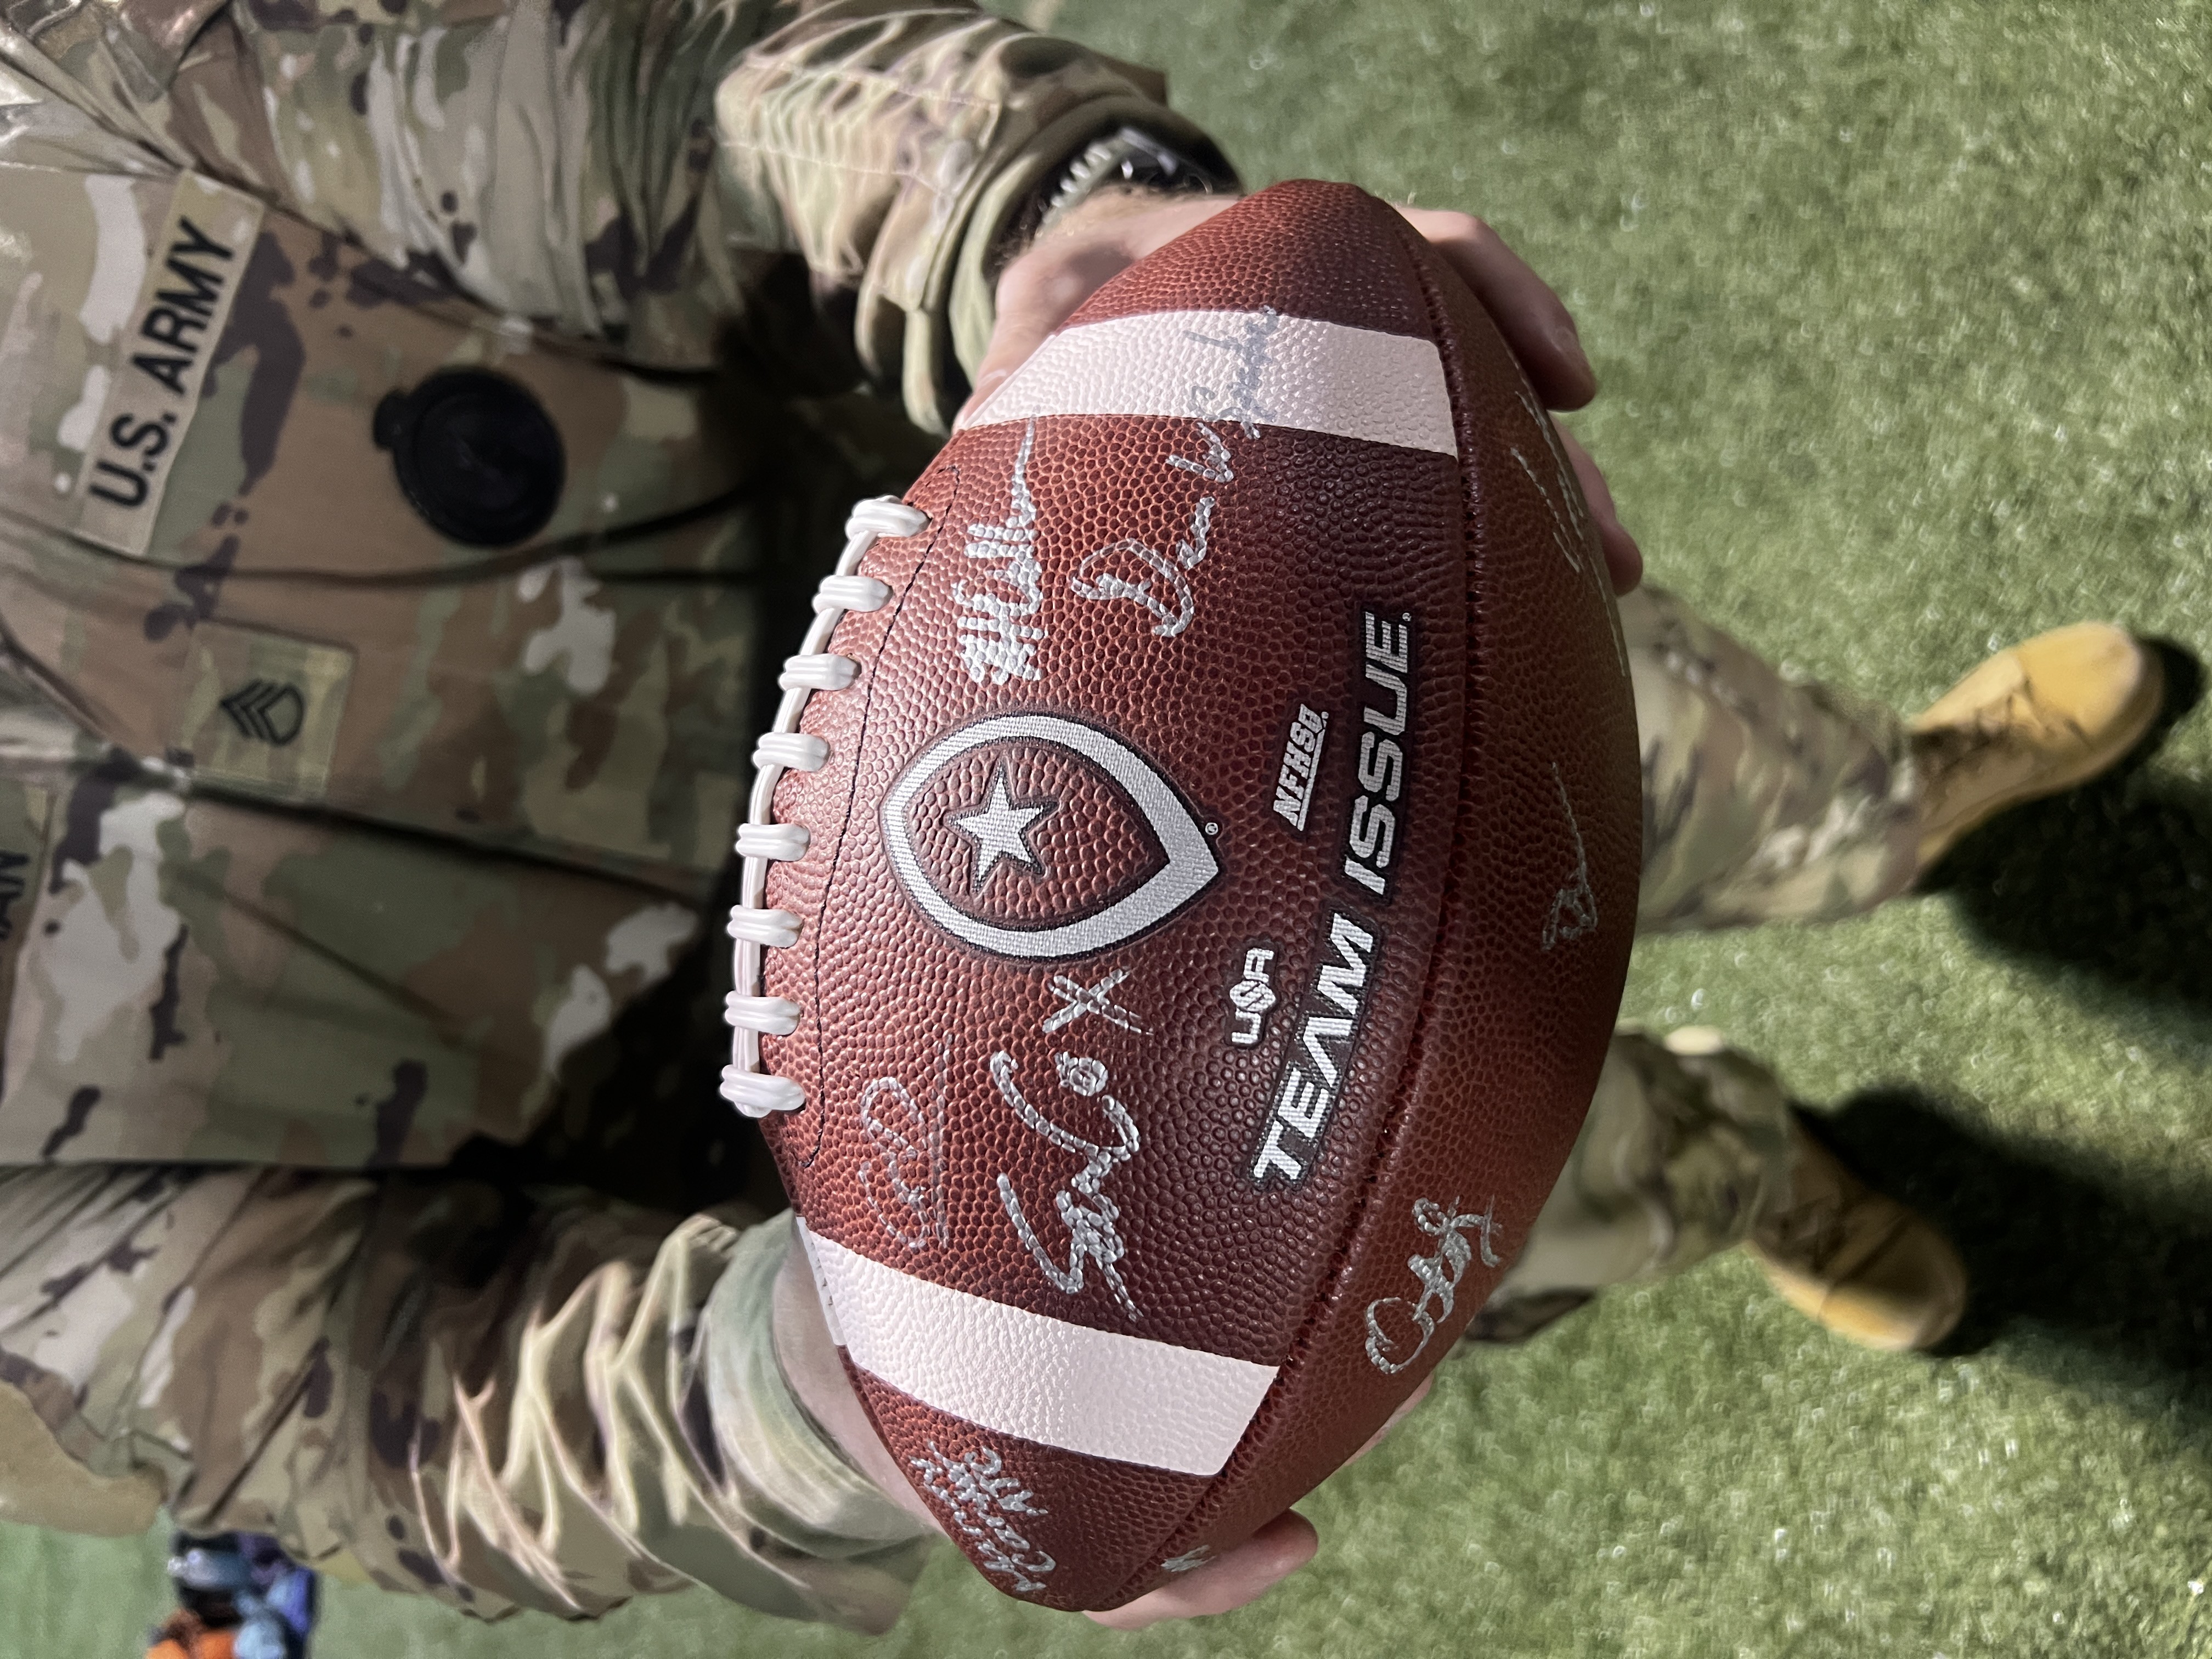 Army National Guard Uniforms Offer New Twist For Football - Escalon Times